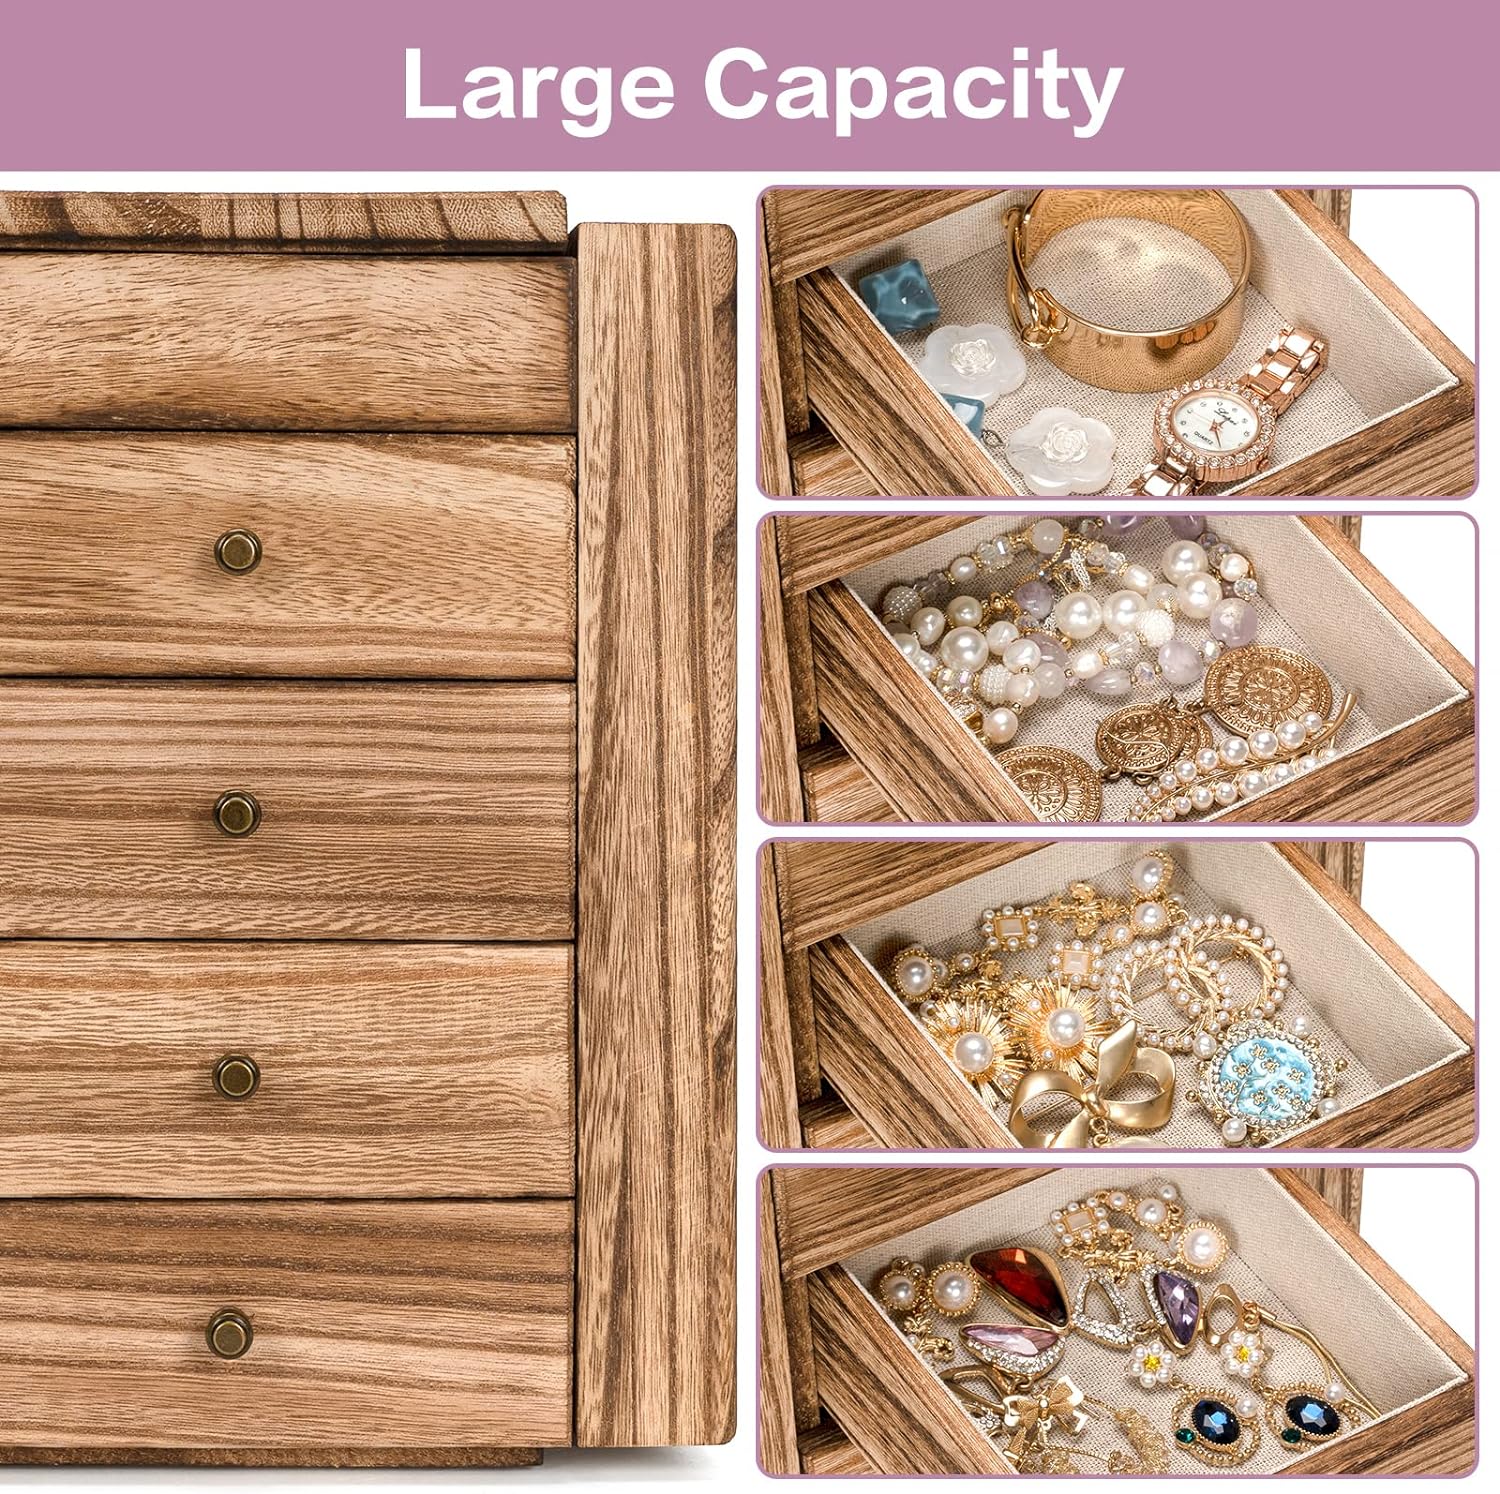 Meangood Jewelry Box Wood for Women, 5-Layer Large Organizer Box with Mirror  4 Drawers for Rings, Earrings, Necklaces, Vintage Style Torched Wood